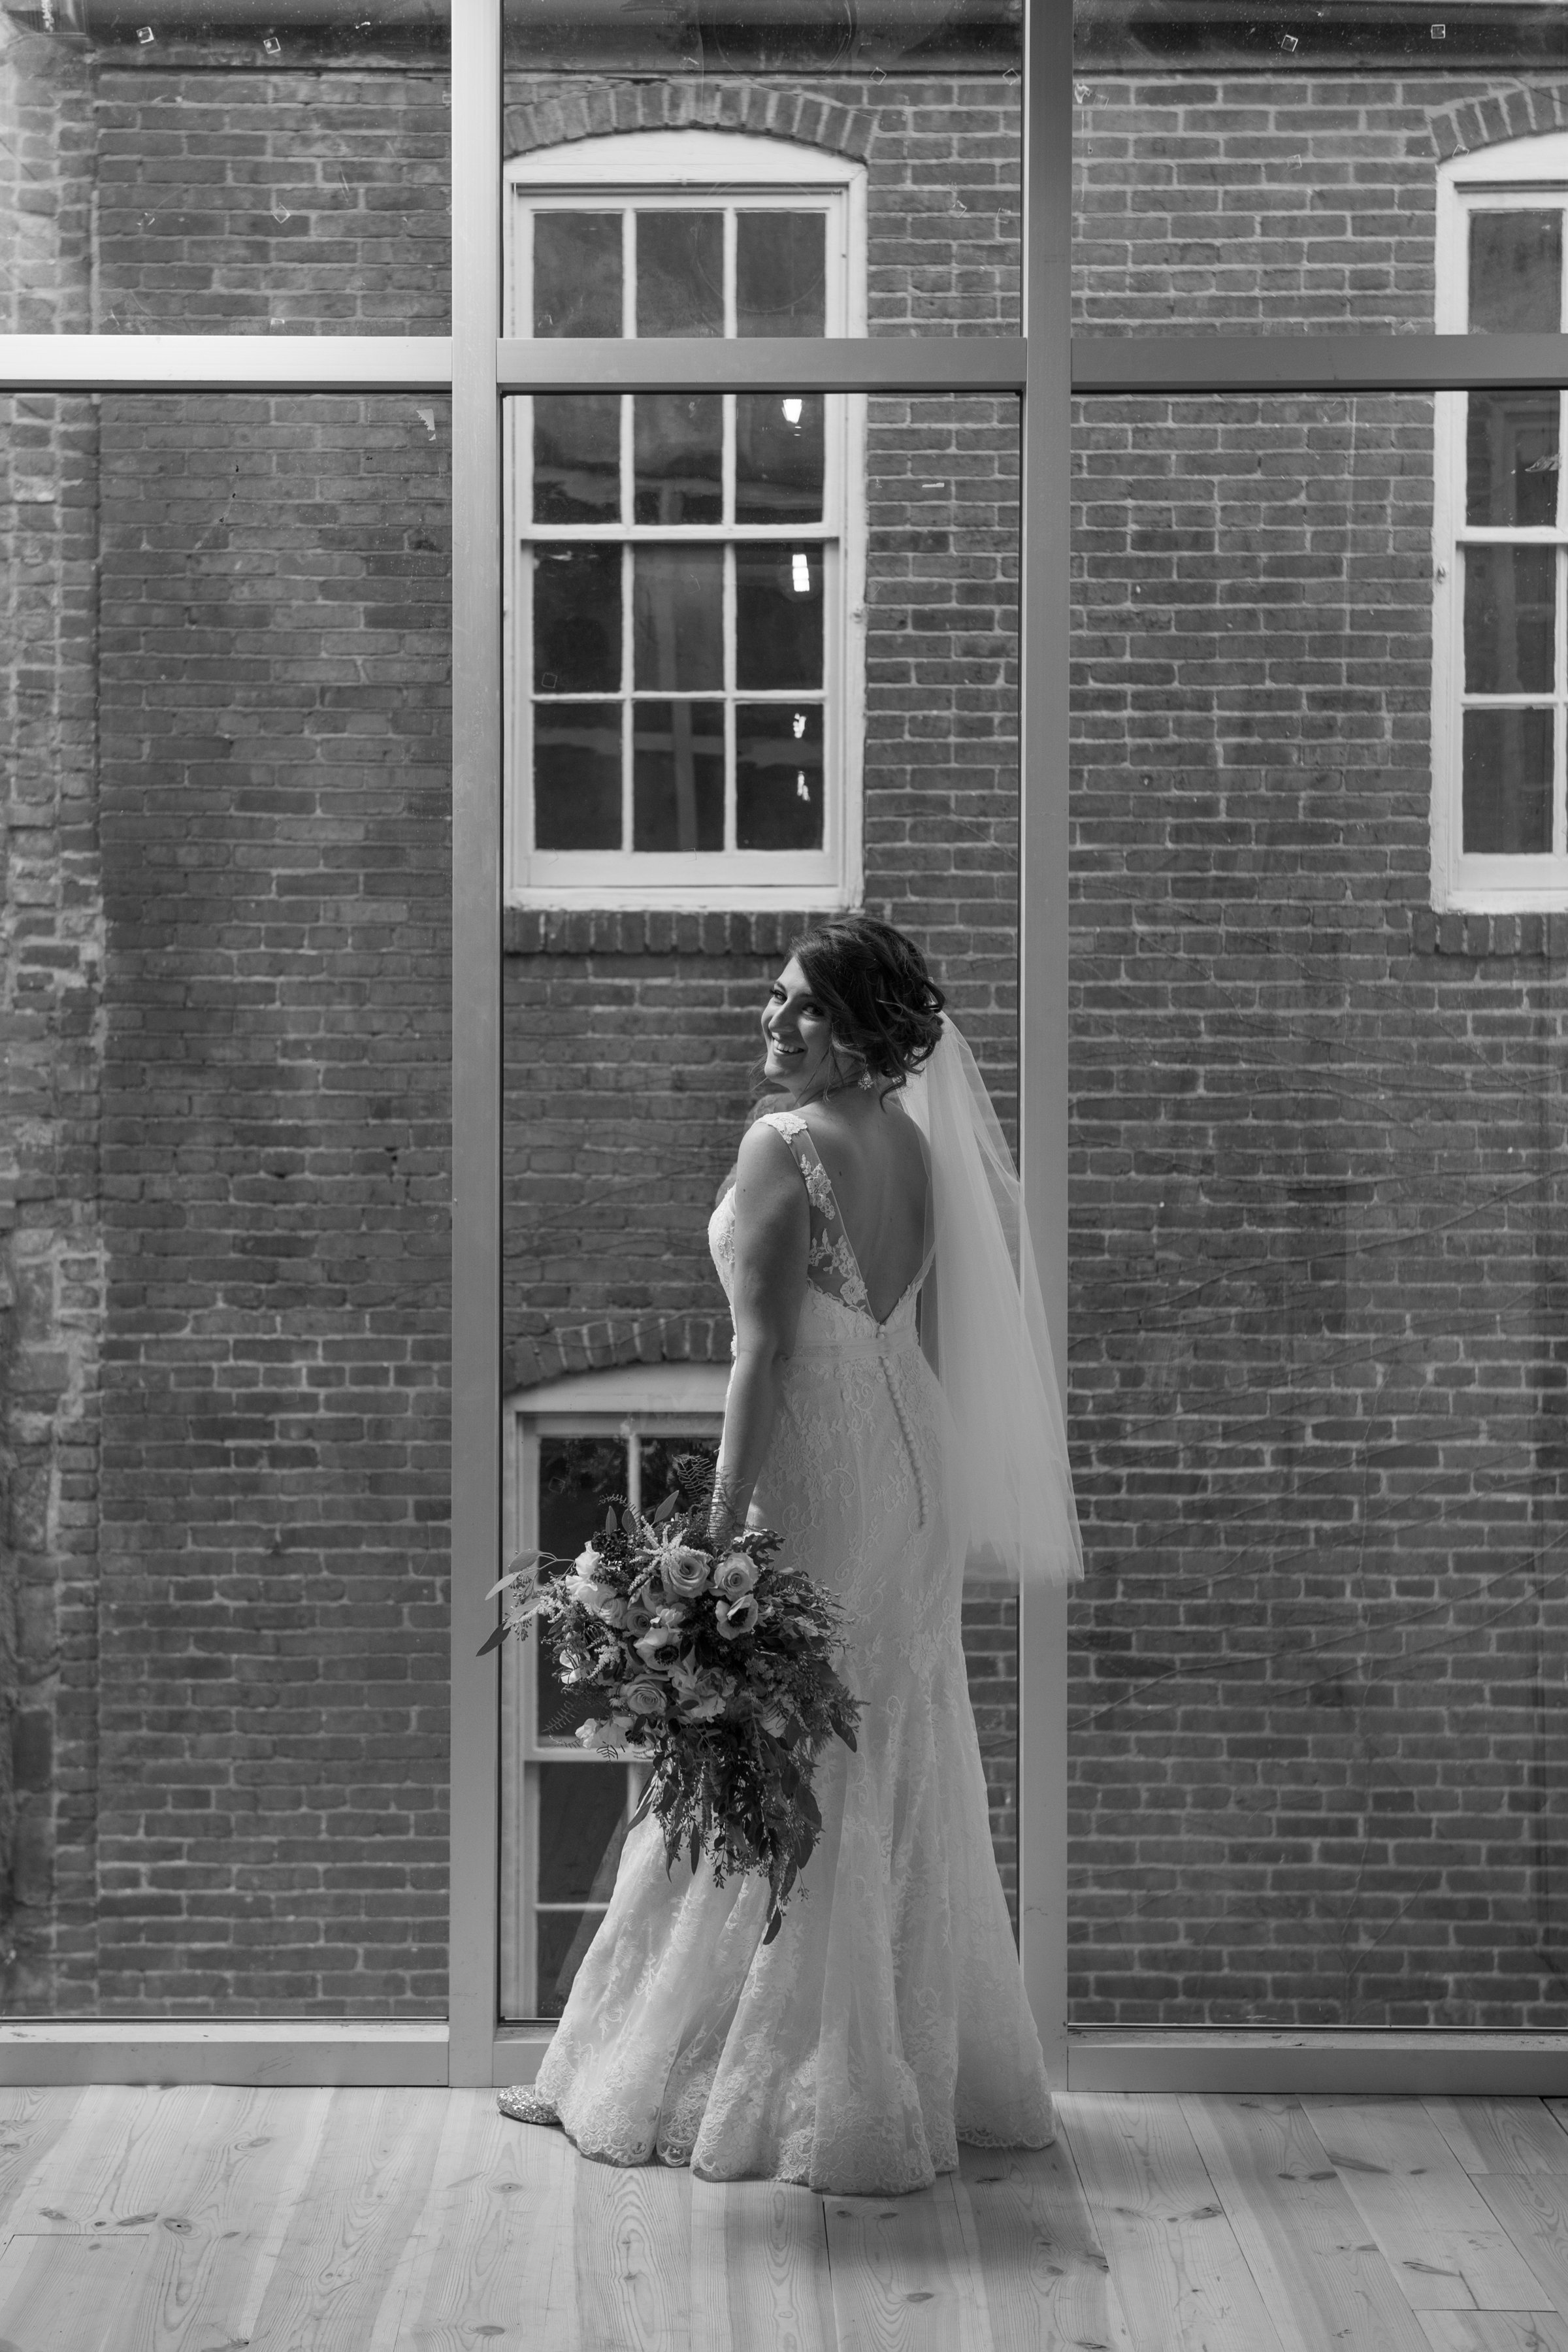 Bride in front of large window in black and white